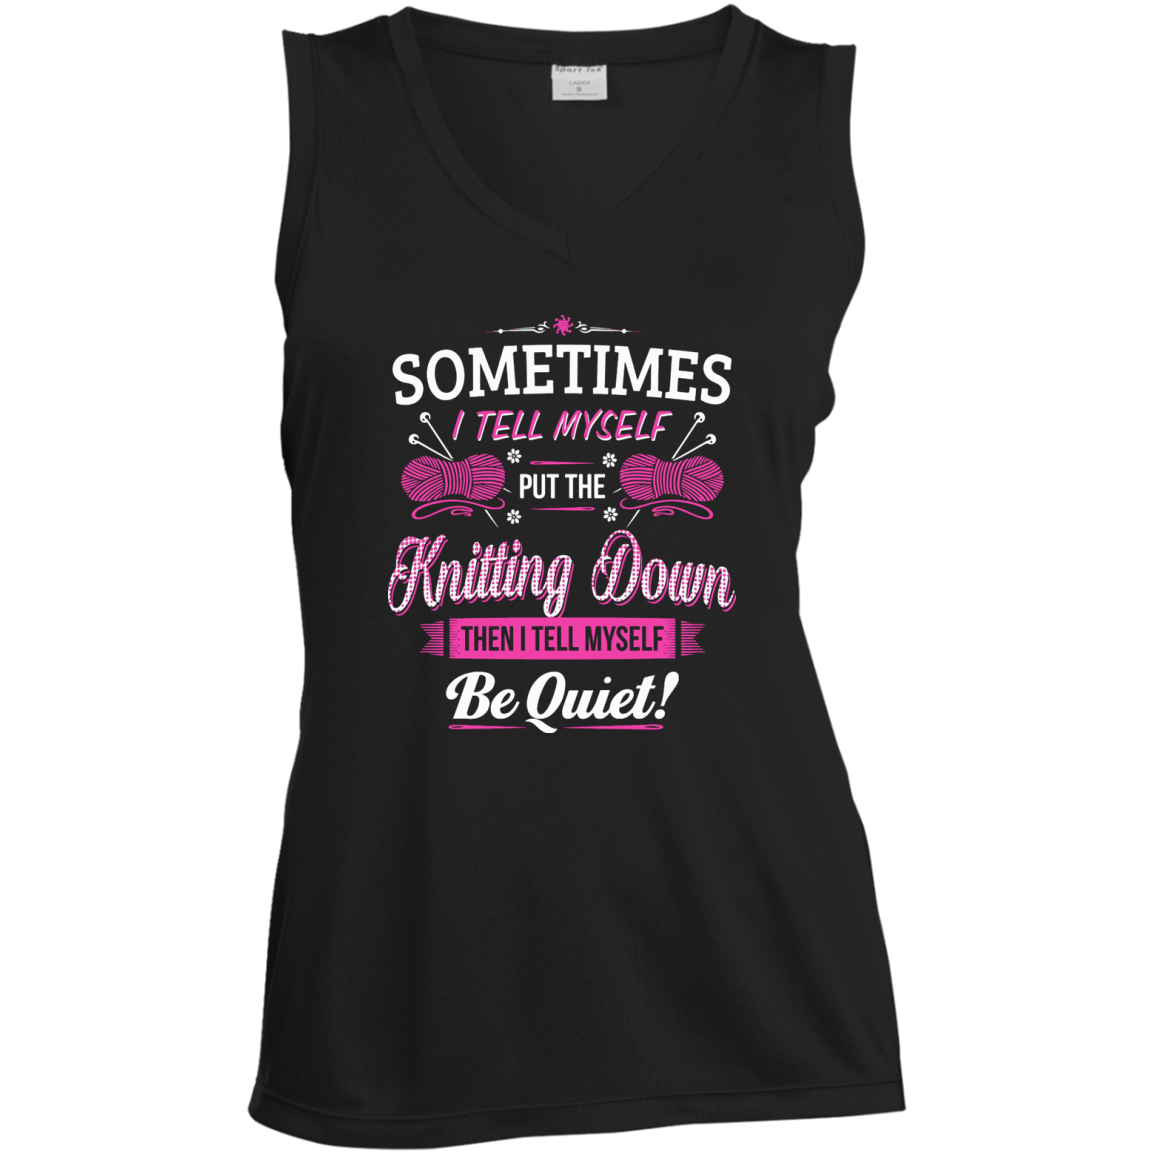 Put the Knitting Down Ladies Sleeveless V-Neck - Crafter4Life - 2